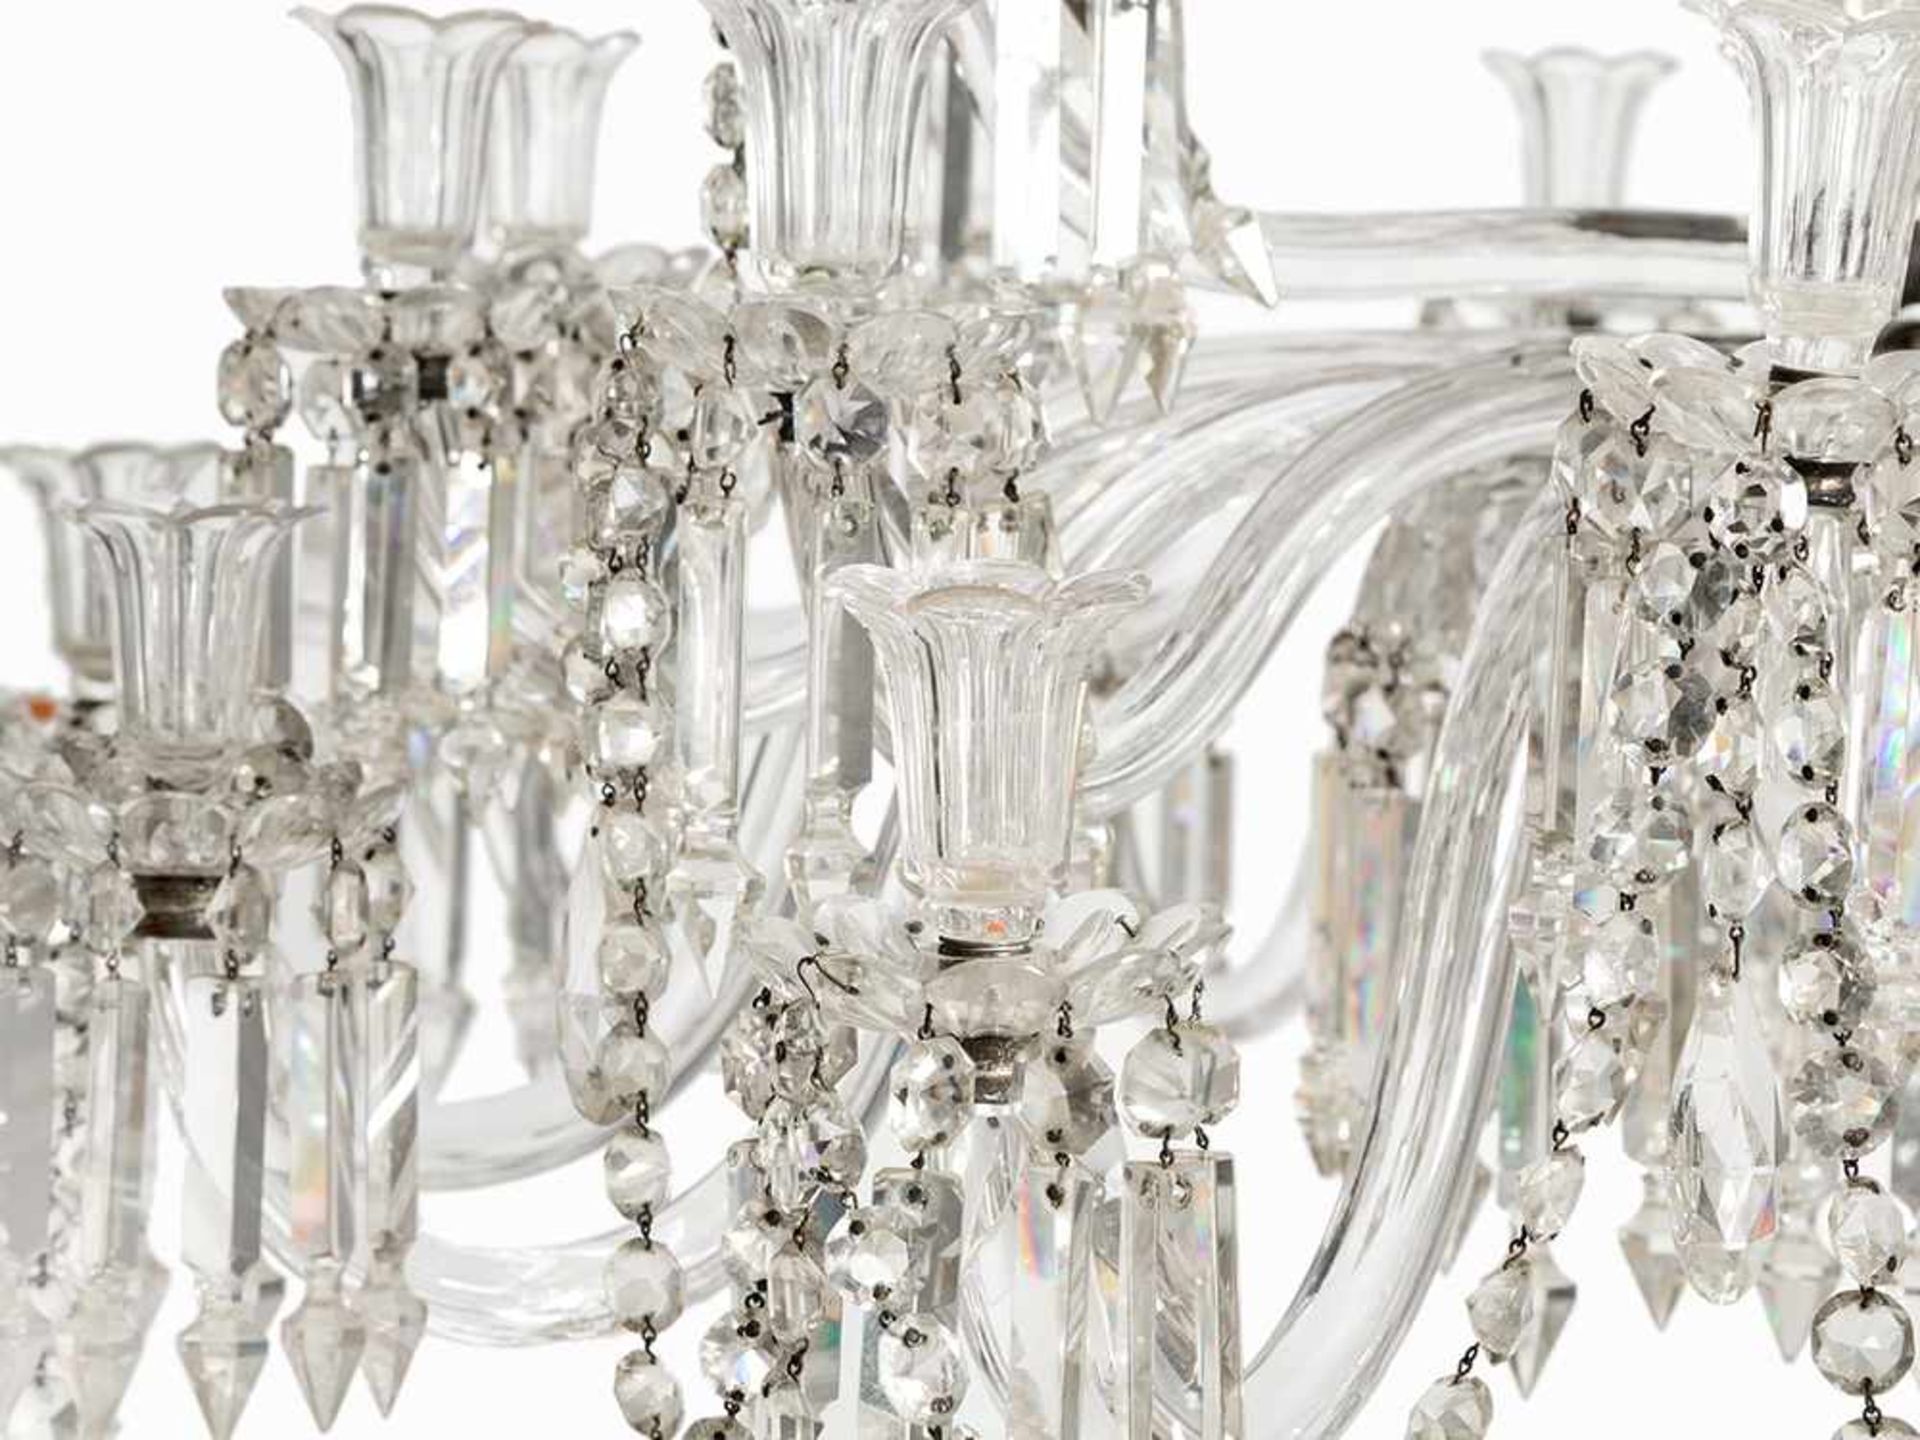 Magnificent Baccarat Chandelier, France, 19th C. Baccarat crystal France, 19th century 30 electric - Image 4 of 10